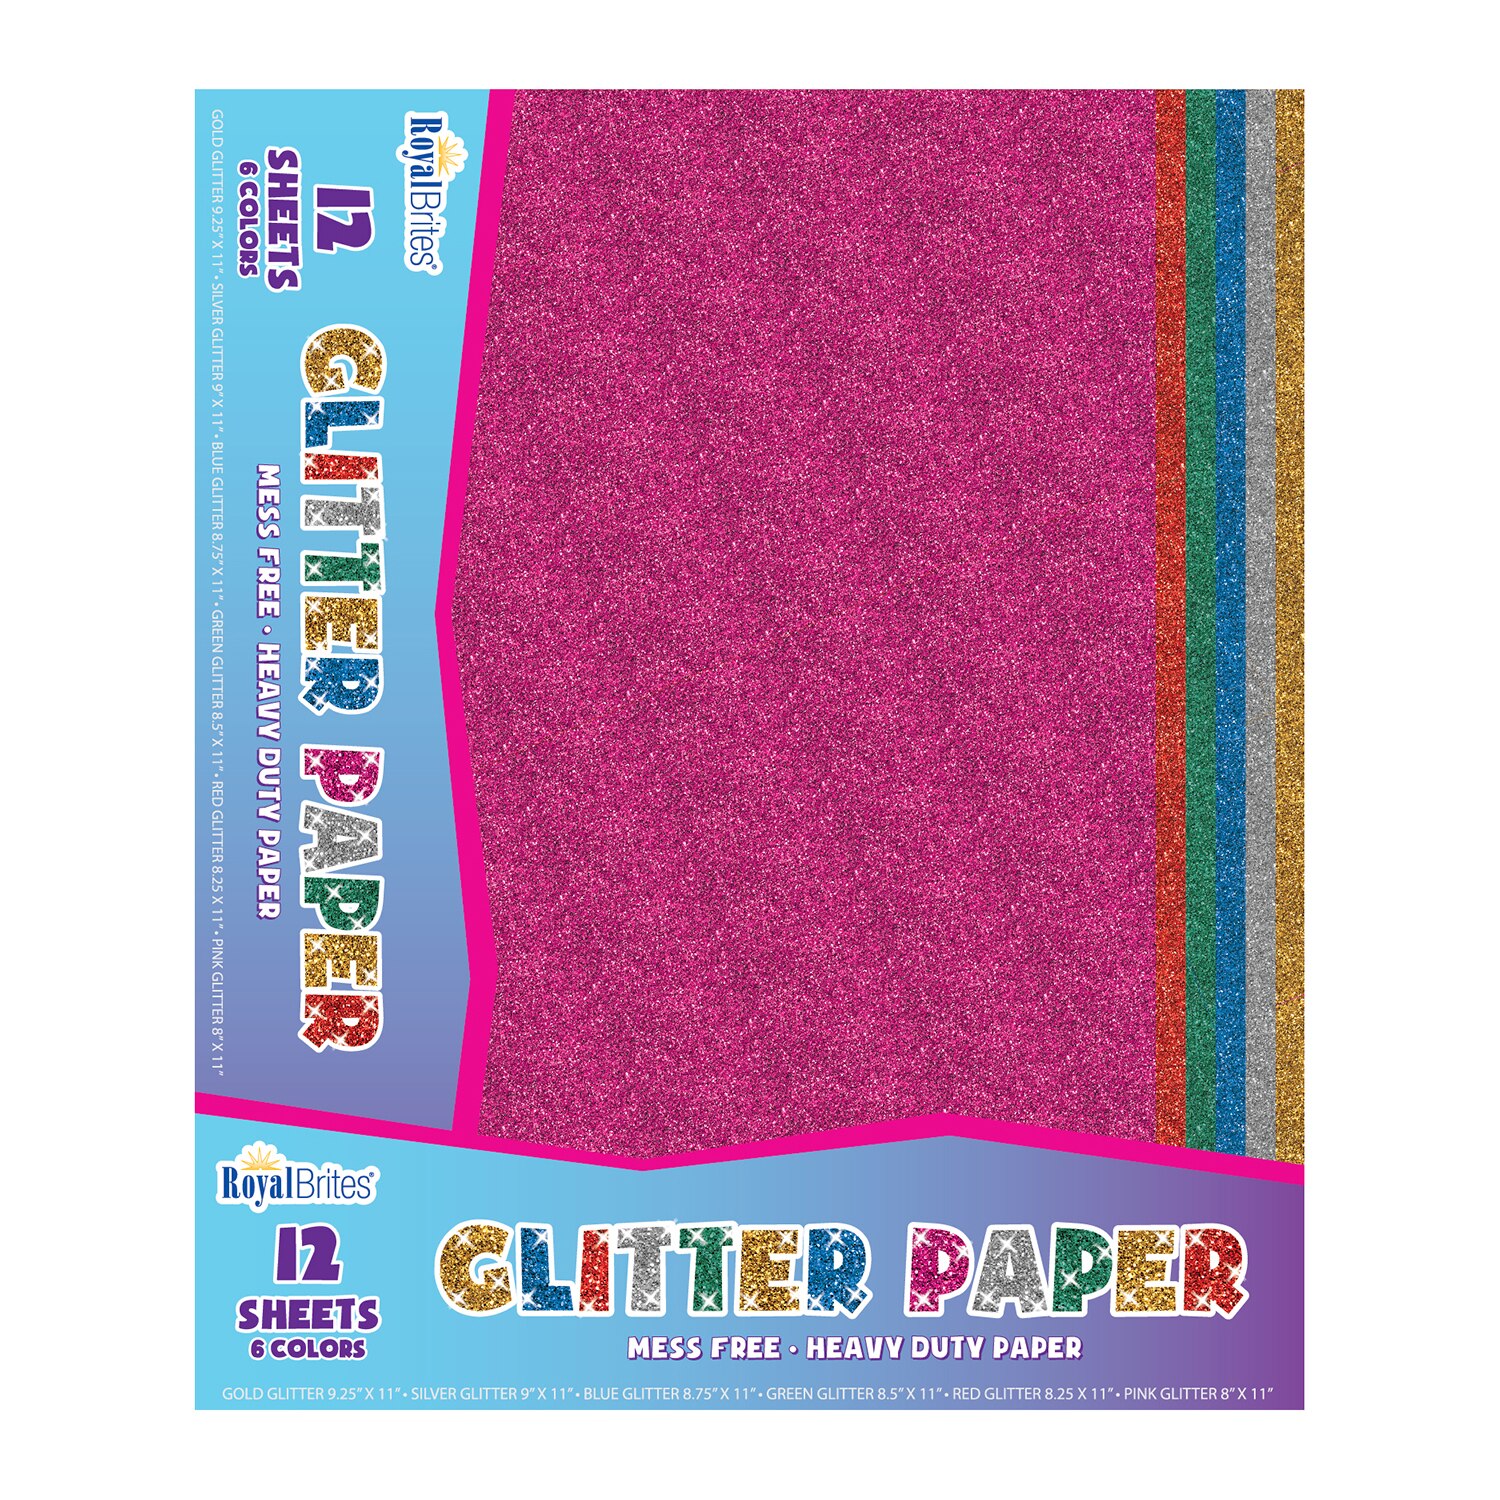 Royal Brites Glitter Paper Assorted Colors, 9.25